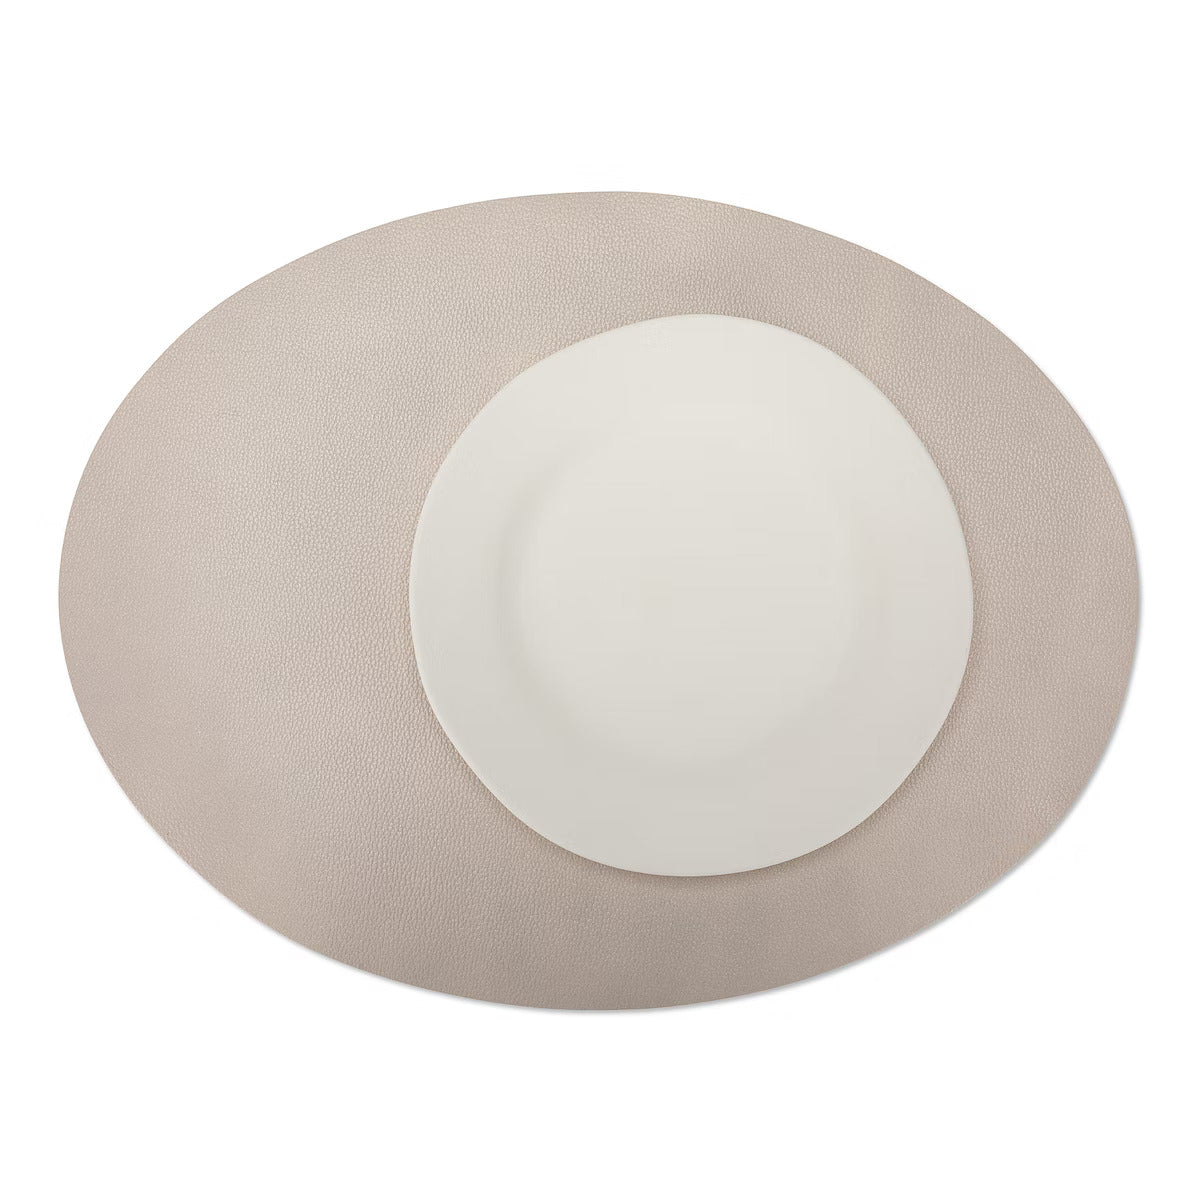 A large oval textured washable paper placemat in beige is shown under a white plate.